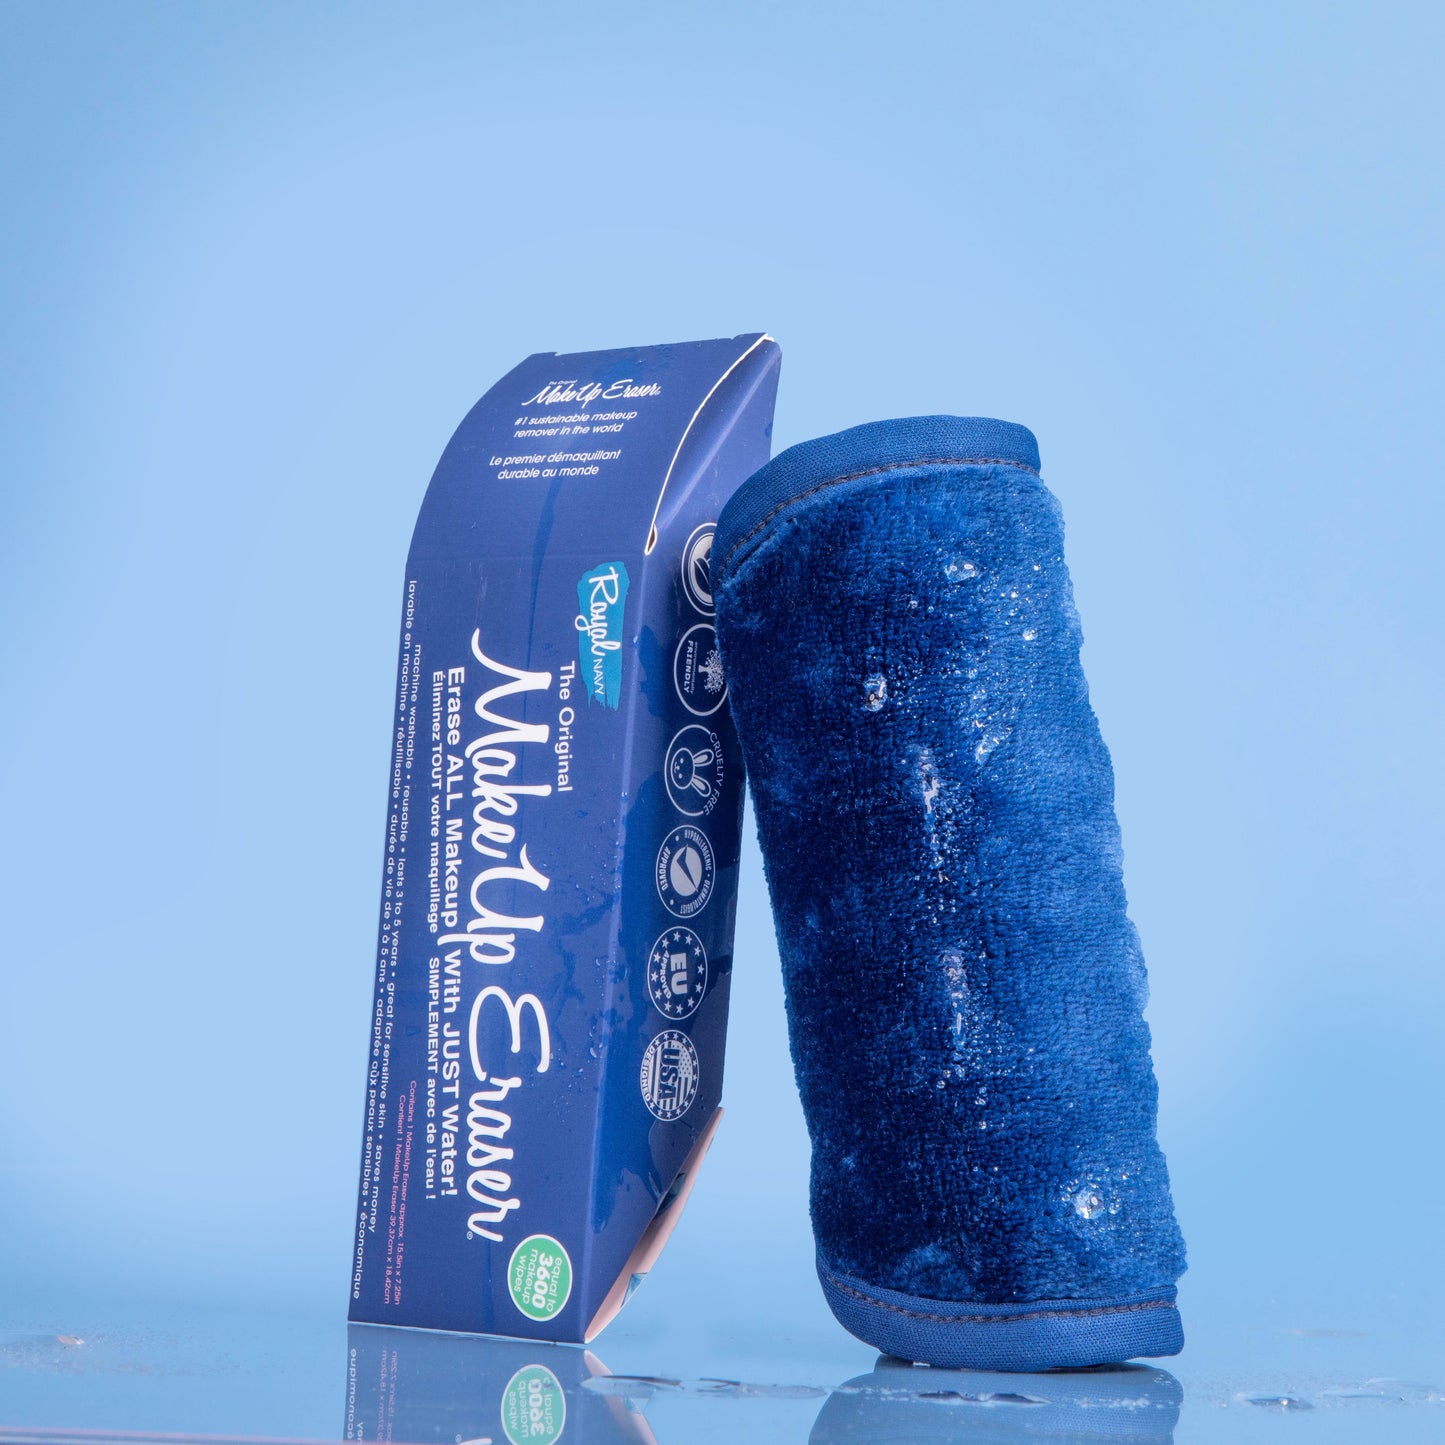 Rolled up Royal Navy MakeUp Eraser next to packaging surrounded by waterdrops.